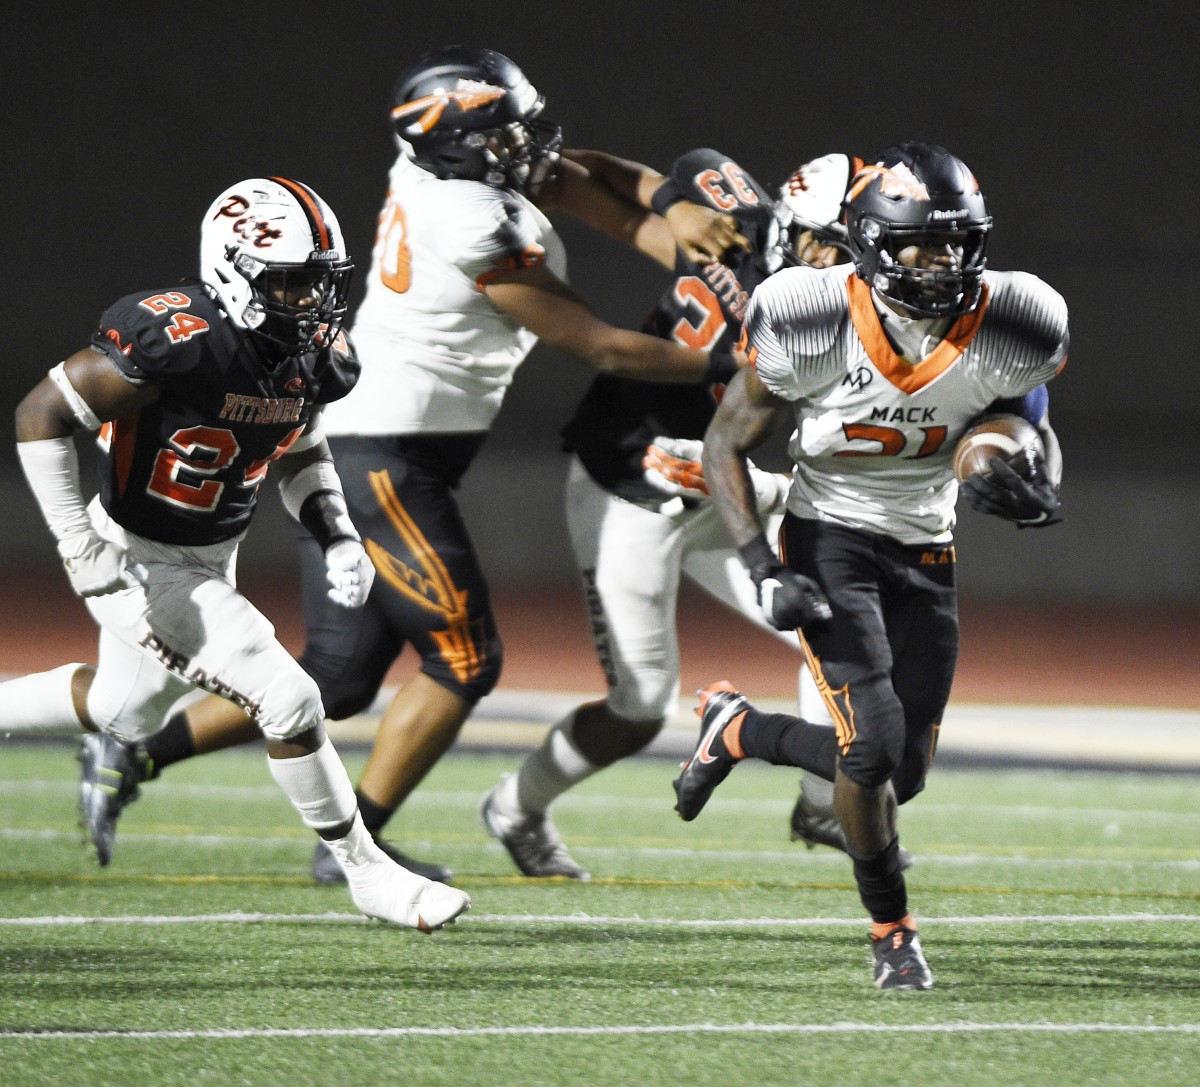 McClymonds' senior RB Jaivian Thomas (21) rushed for 165 yards and two touchdowns. Photo: Eric Taylor.